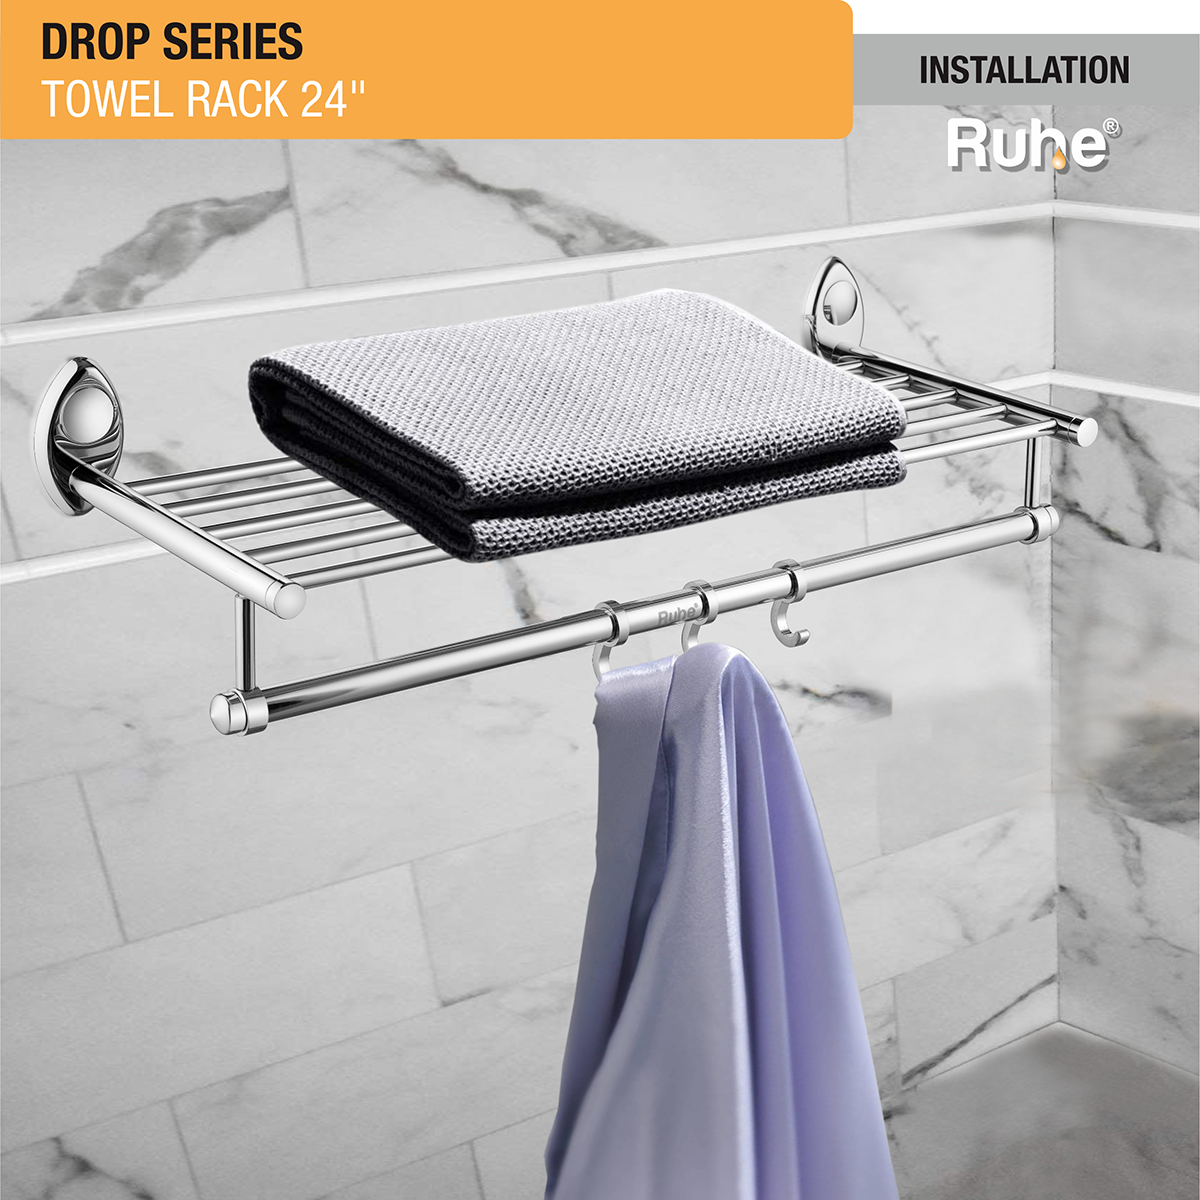 Drop Stainless Steel Towel Rack (24 Inches) installation